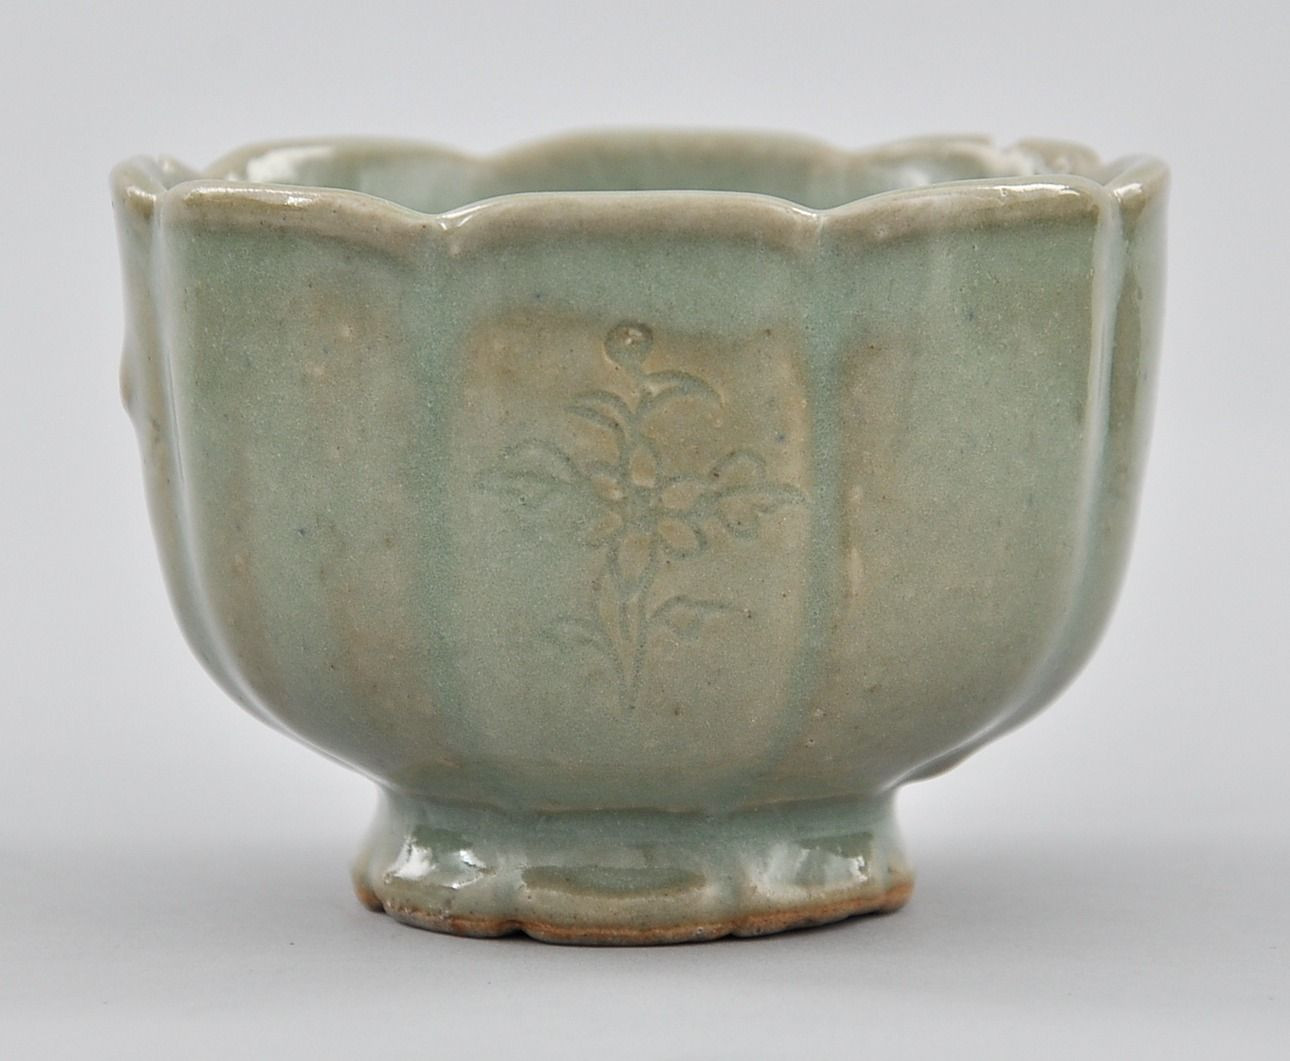 22 Amazing Green Celadon Vase 2024 free download green celadon vase of a korean celadon cup ca koryo dynasty ca 13th 14th century for a korean celadon cup ca koryo dynasty ca 13th 14th century earthenware with green celadon glaze in high g